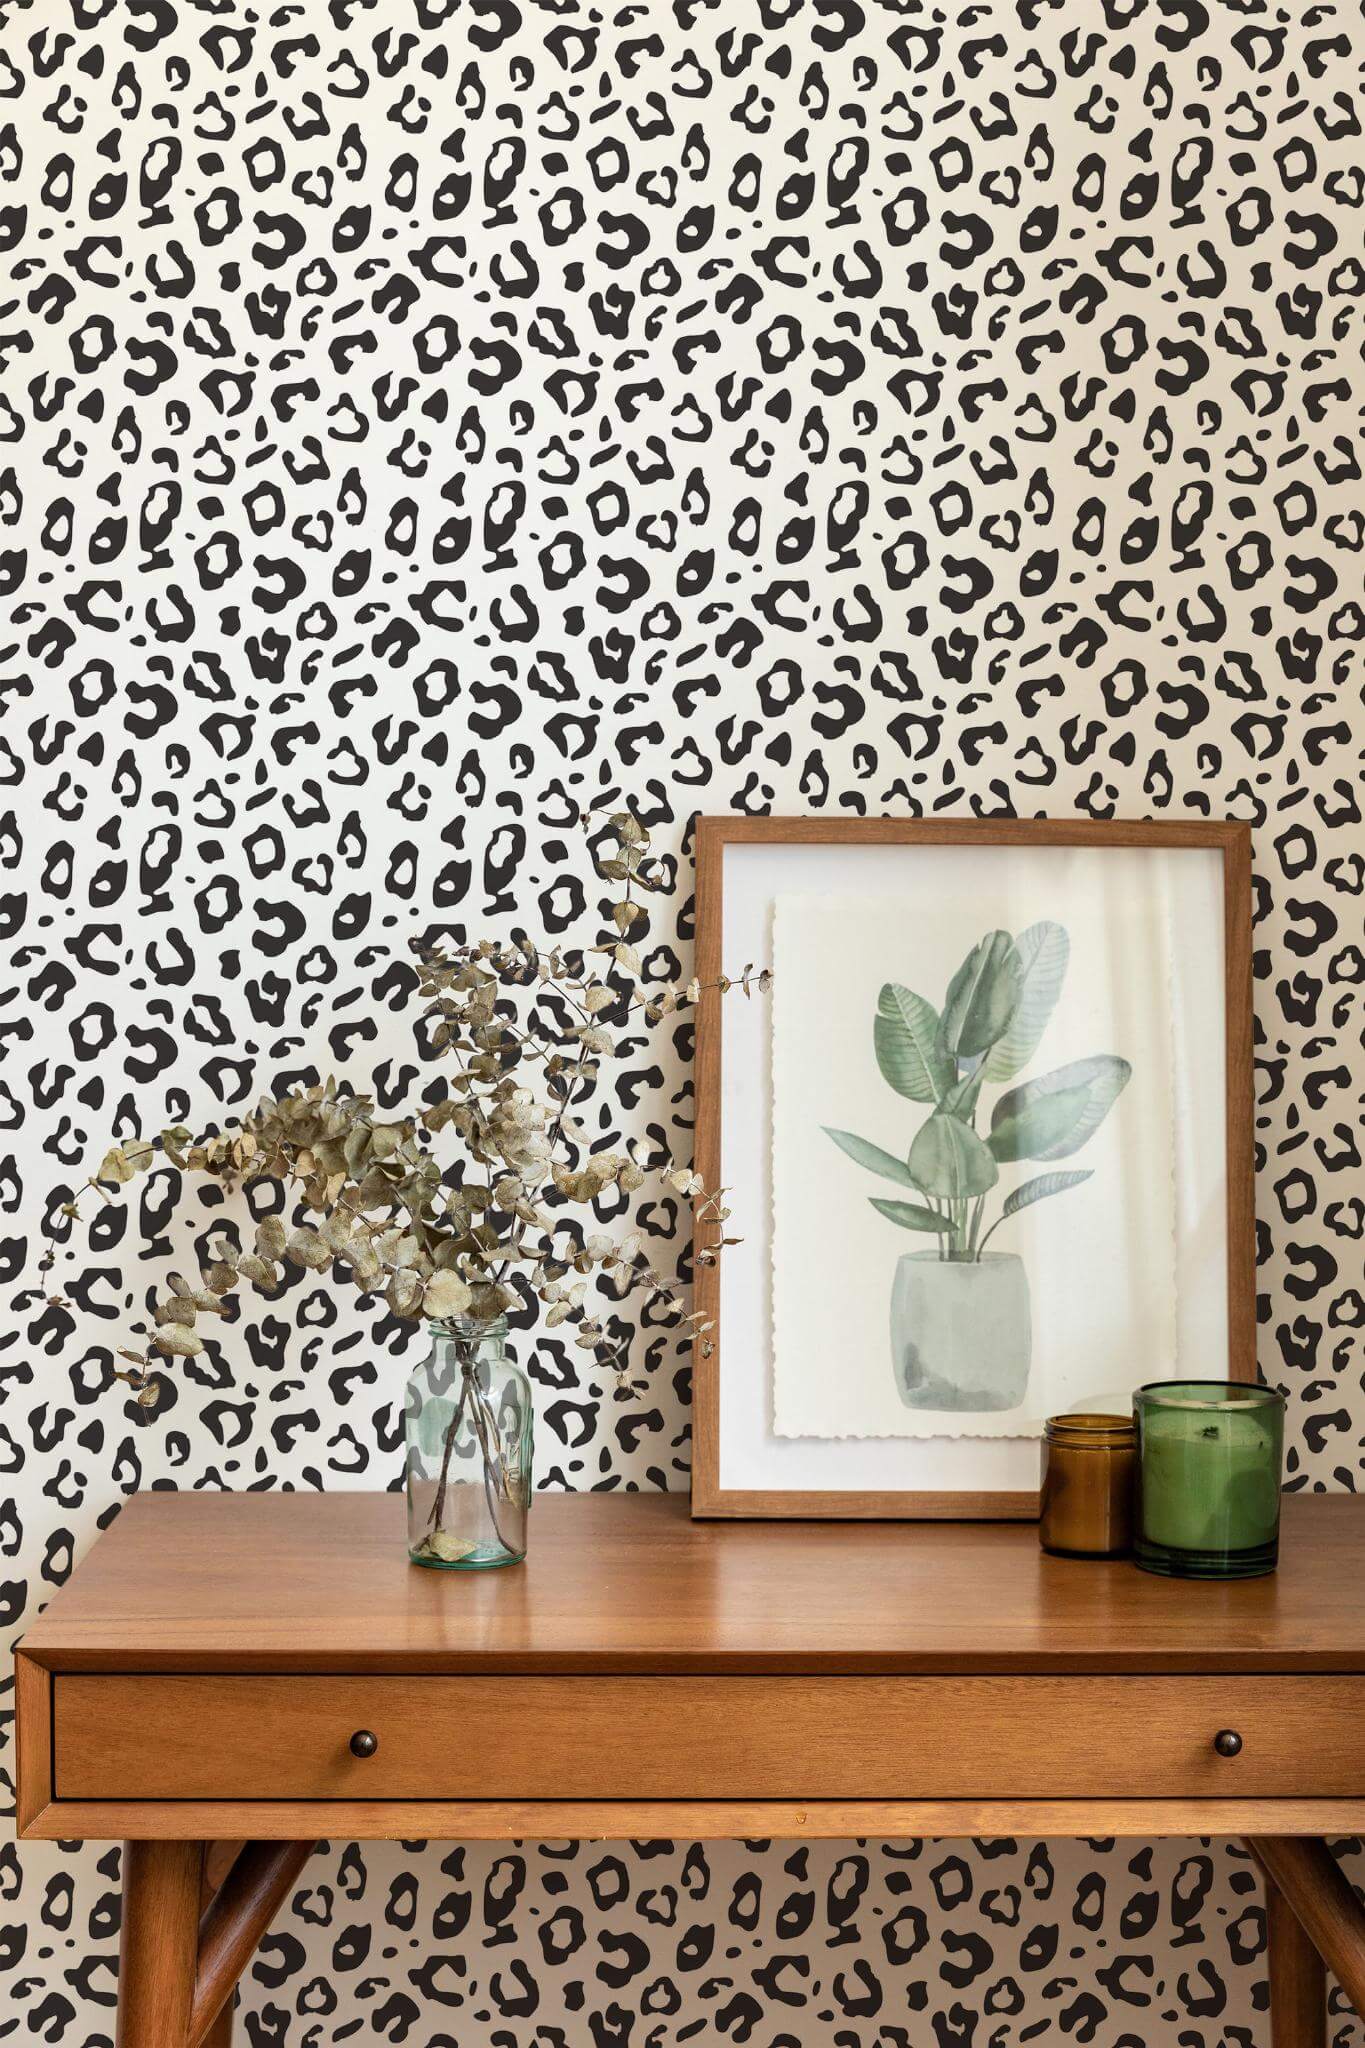 Leopard print Wallpaper - Peel and Stick or Non-Pasted